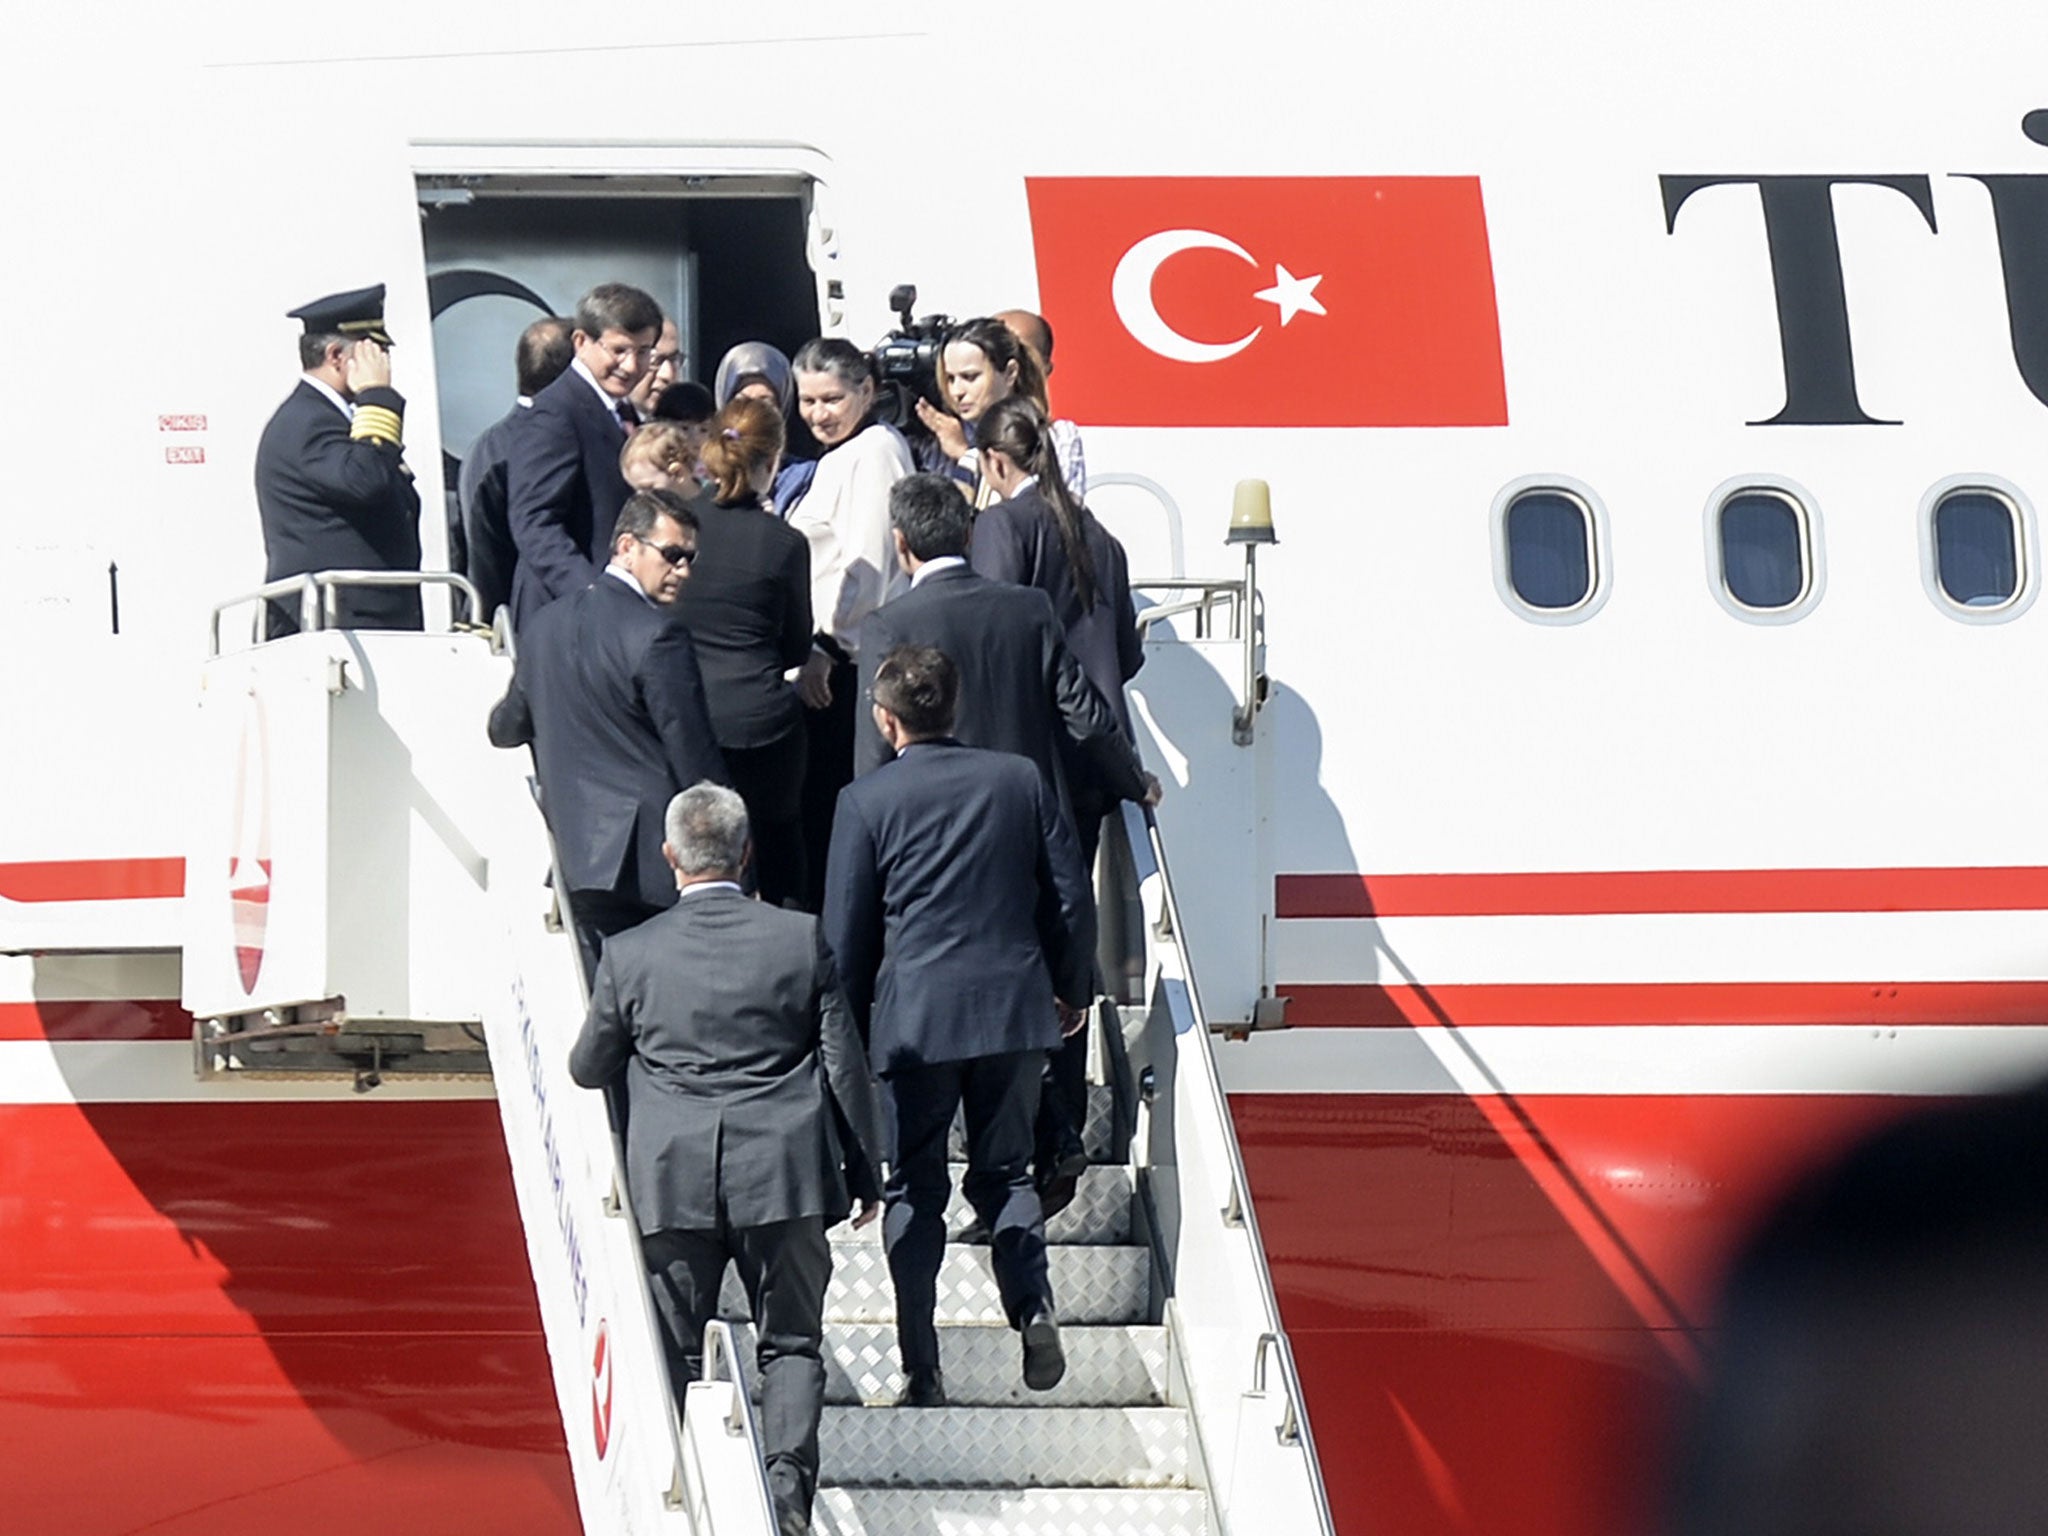 Turkish Prime Minister Ahmet Davutoglu (L, top of the gangway) gets into his plane with hostages on September 20